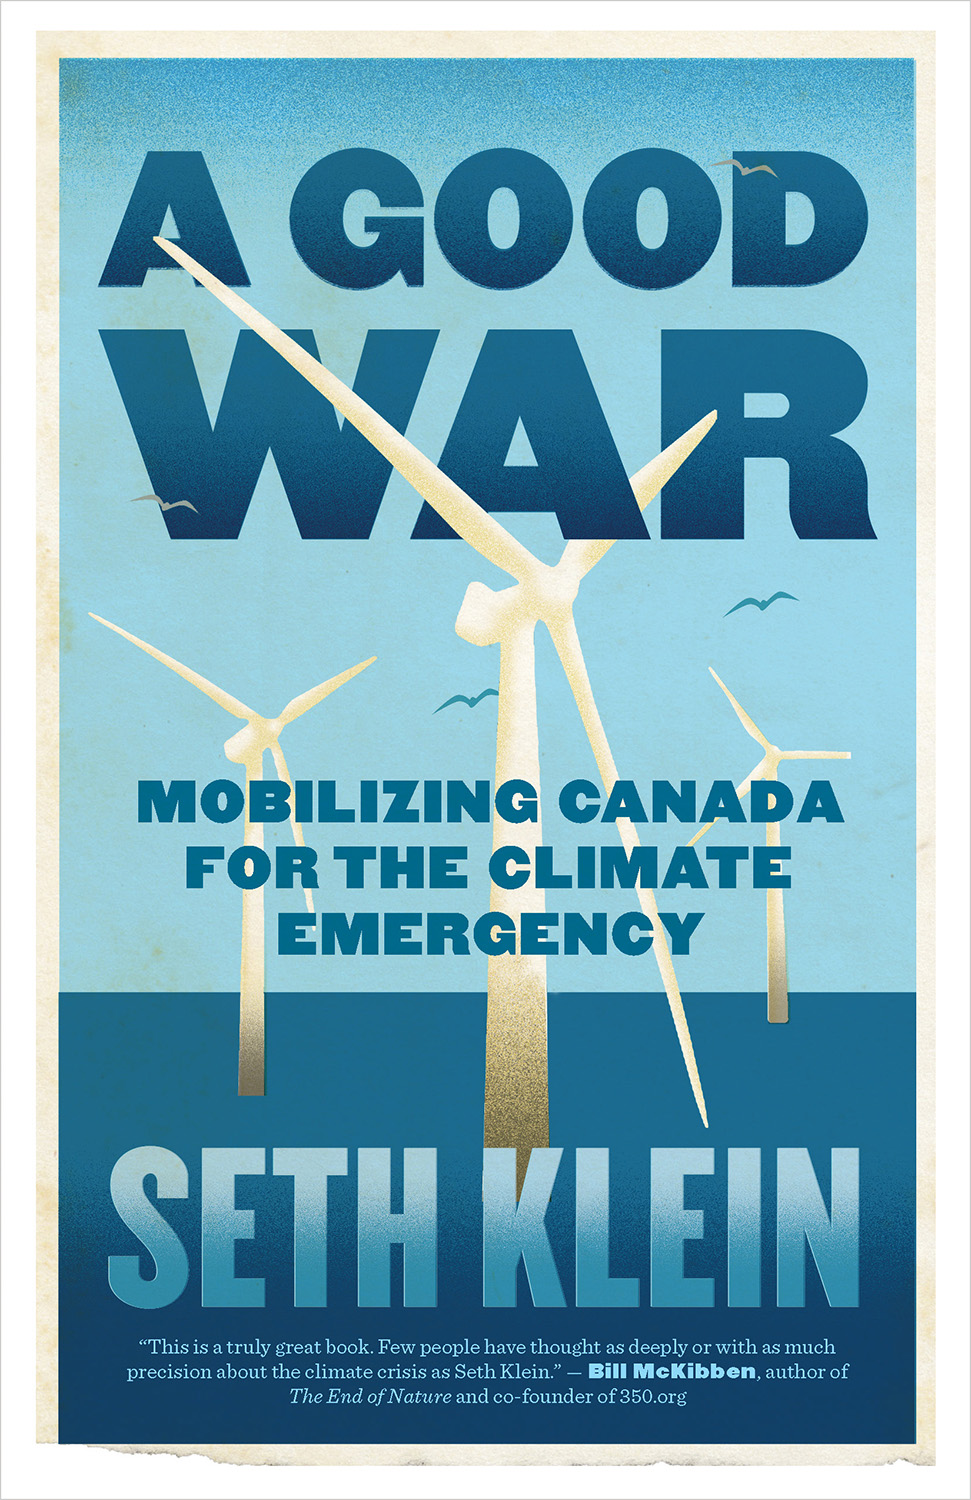 A Good War Mobilizing Canada for the Climate Emergency Seth Klein Contents - photo 1